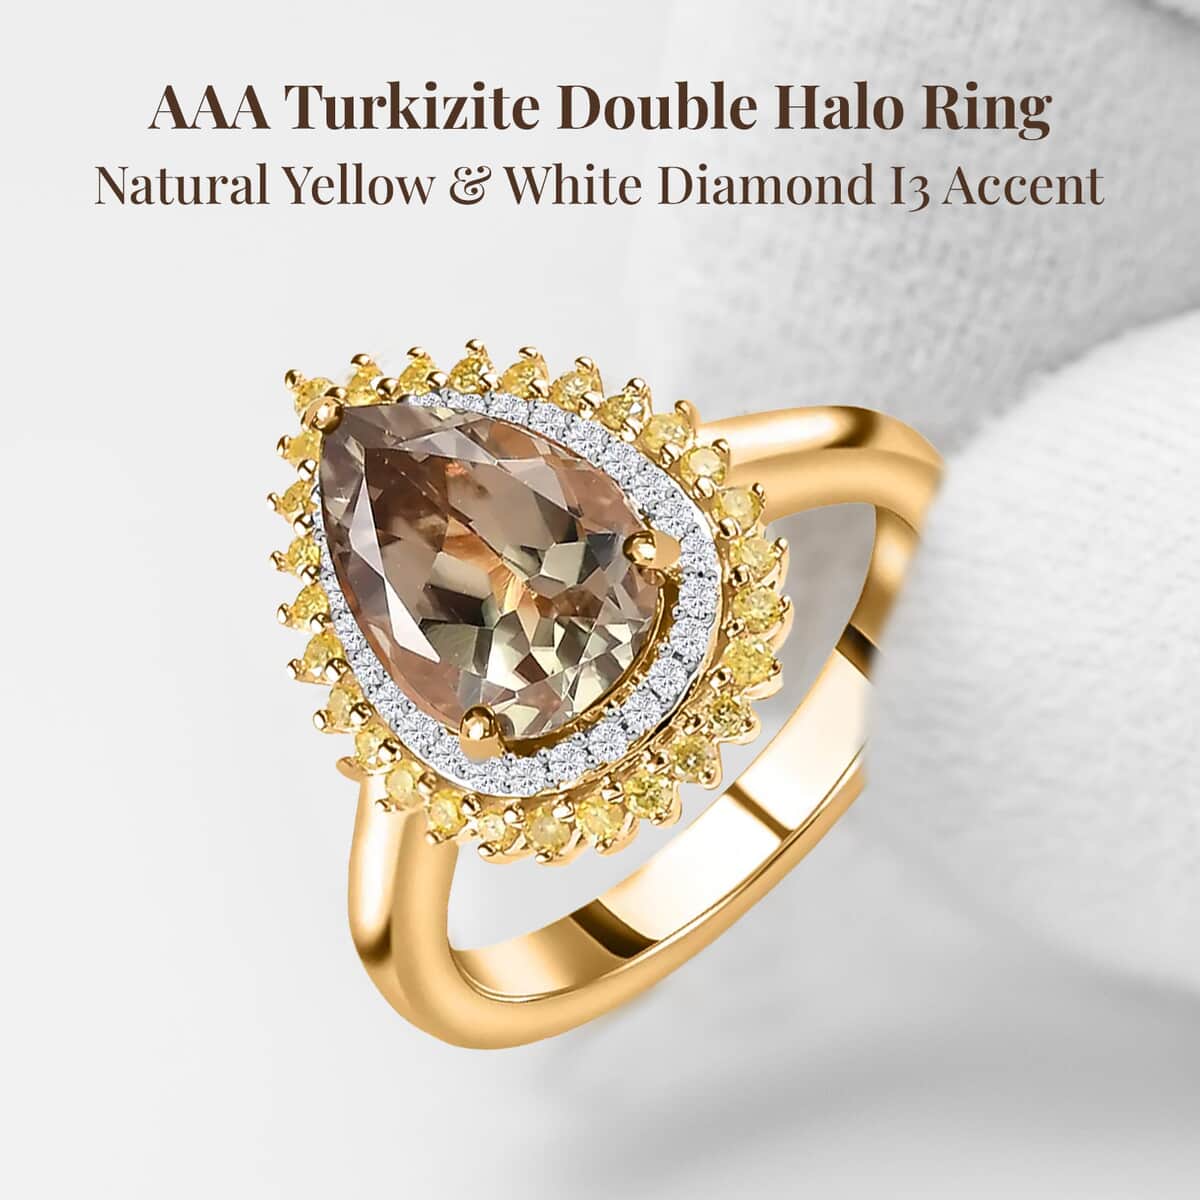 Luxoro 10K Yellow Gold AAA Turkizite, Natural Yellow and White Diamond I3 Double Halo Ring (Size 7.0) 2.35 ctw image number 2